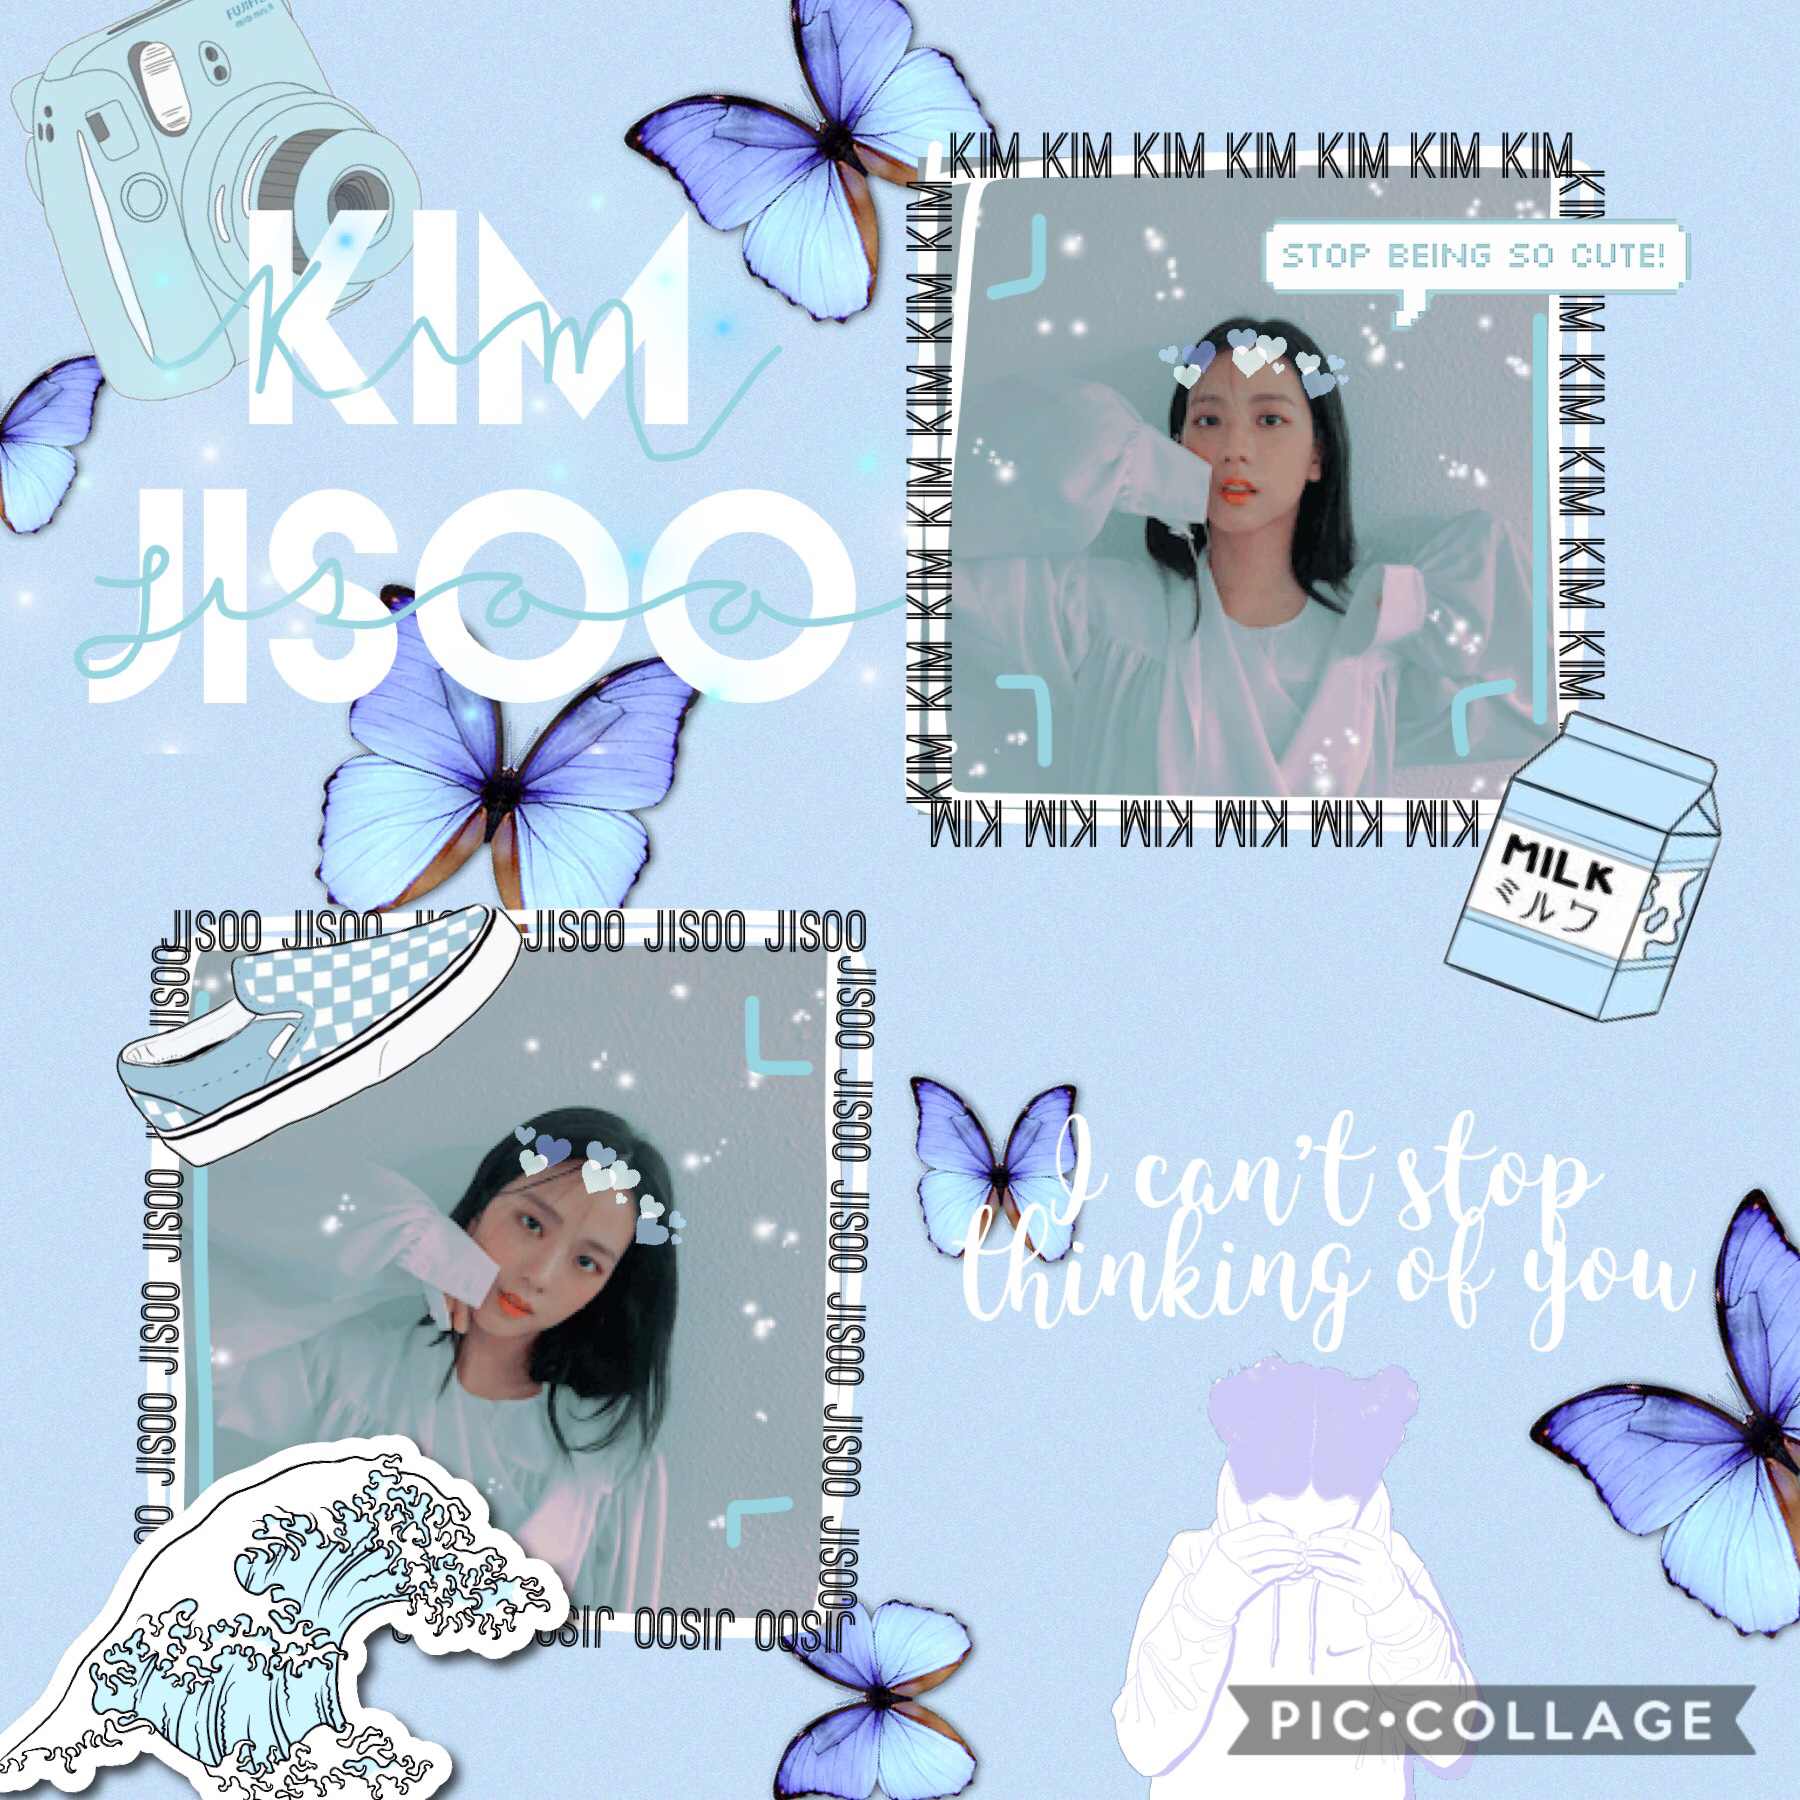 😇 tap 😇
Jisoo is very cute in pale blue! She flows like the water, flies in the sky, and dances with the stars! 💫 💙😂😜🤩😱